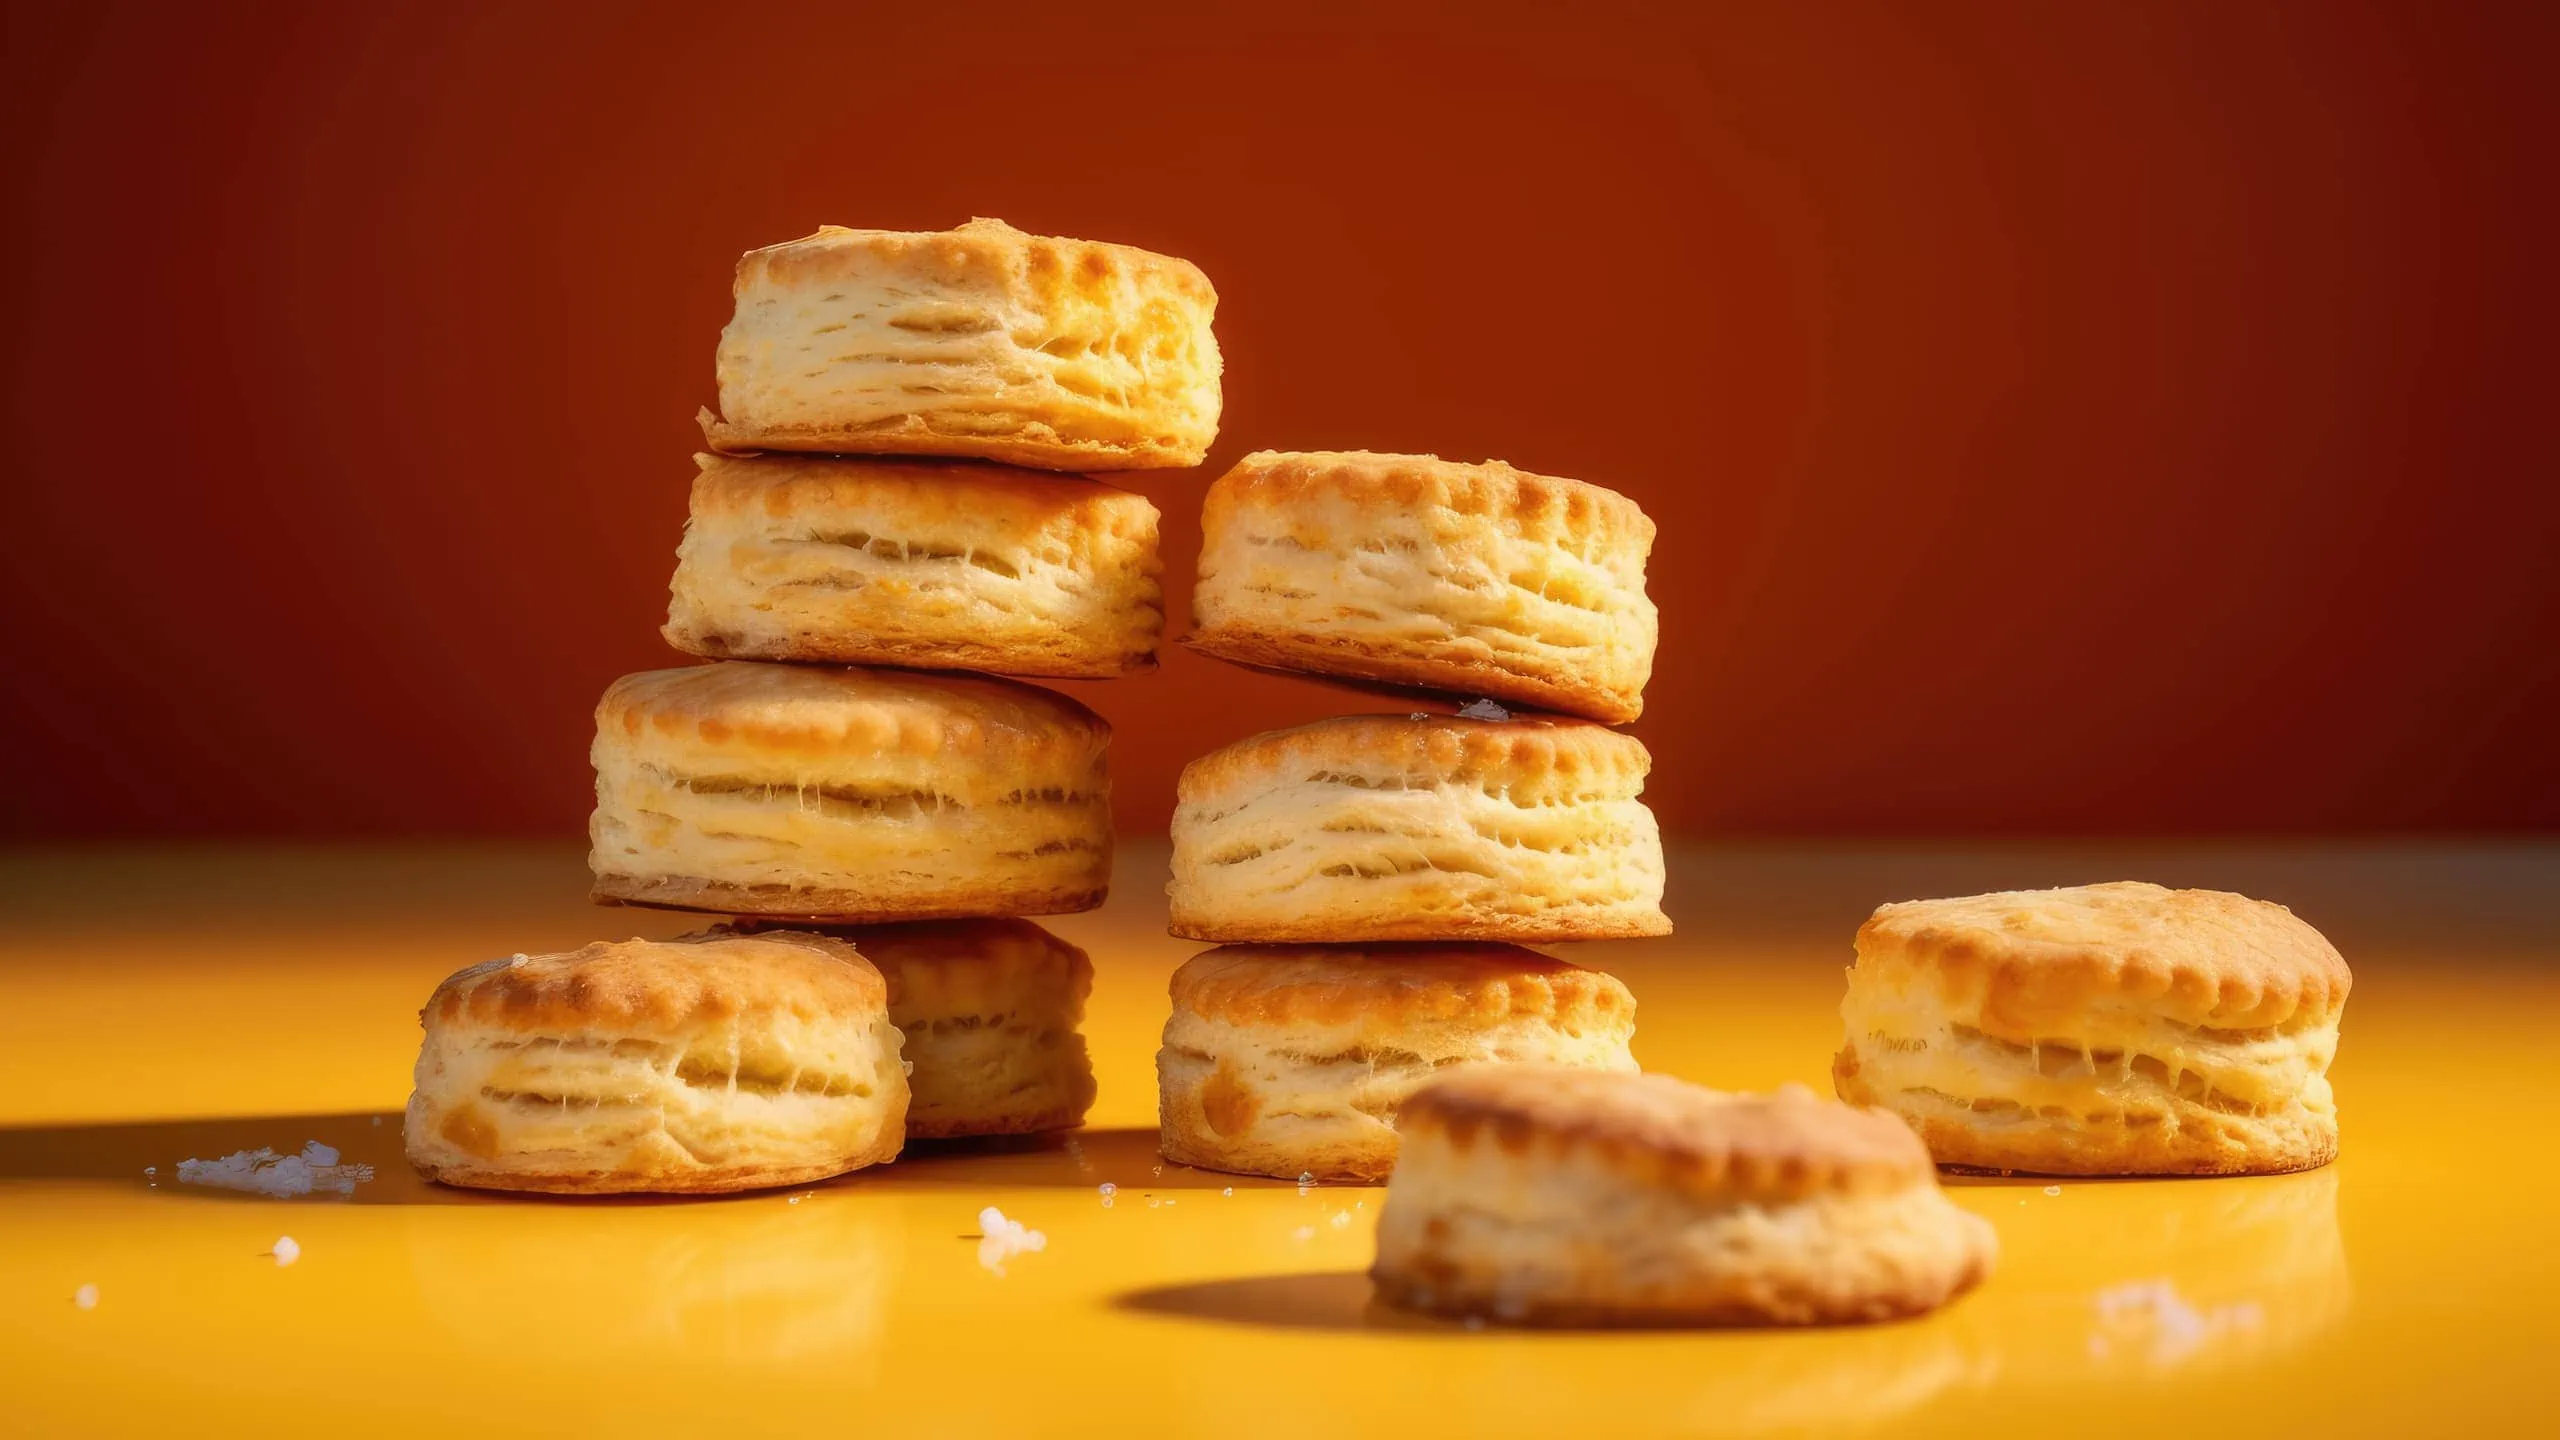 Our version of Bojangles biscuit recipe